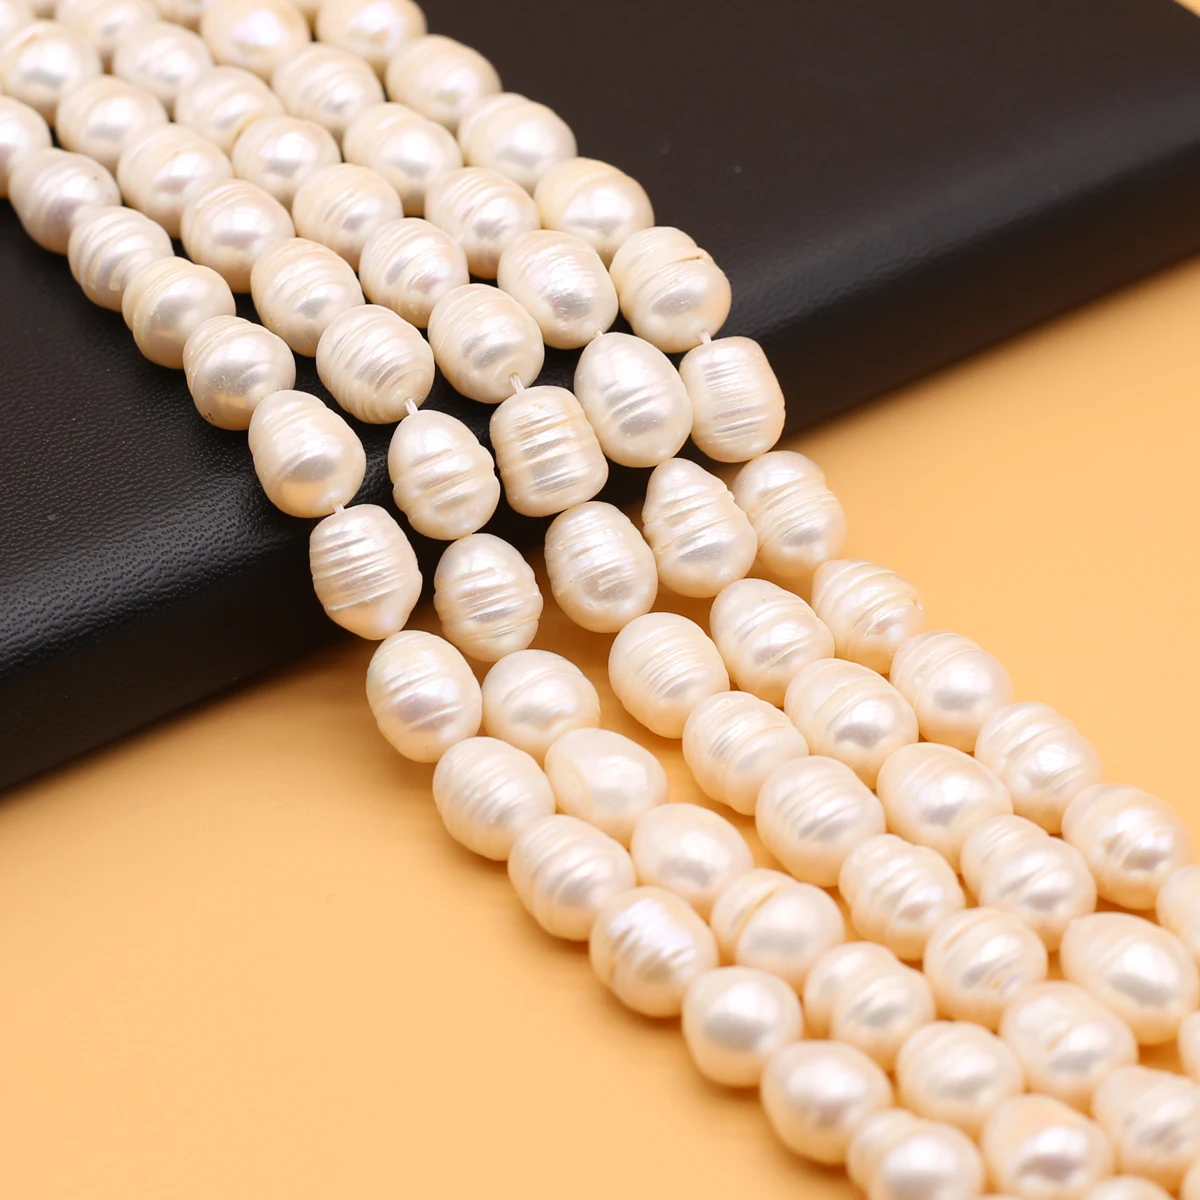 

4 8 10mm Natural Freshwater Pearl Rourd Beads Beaded White Big Small Loose Spacer Beads For Jewelry Making DIY Bracelet Necklace